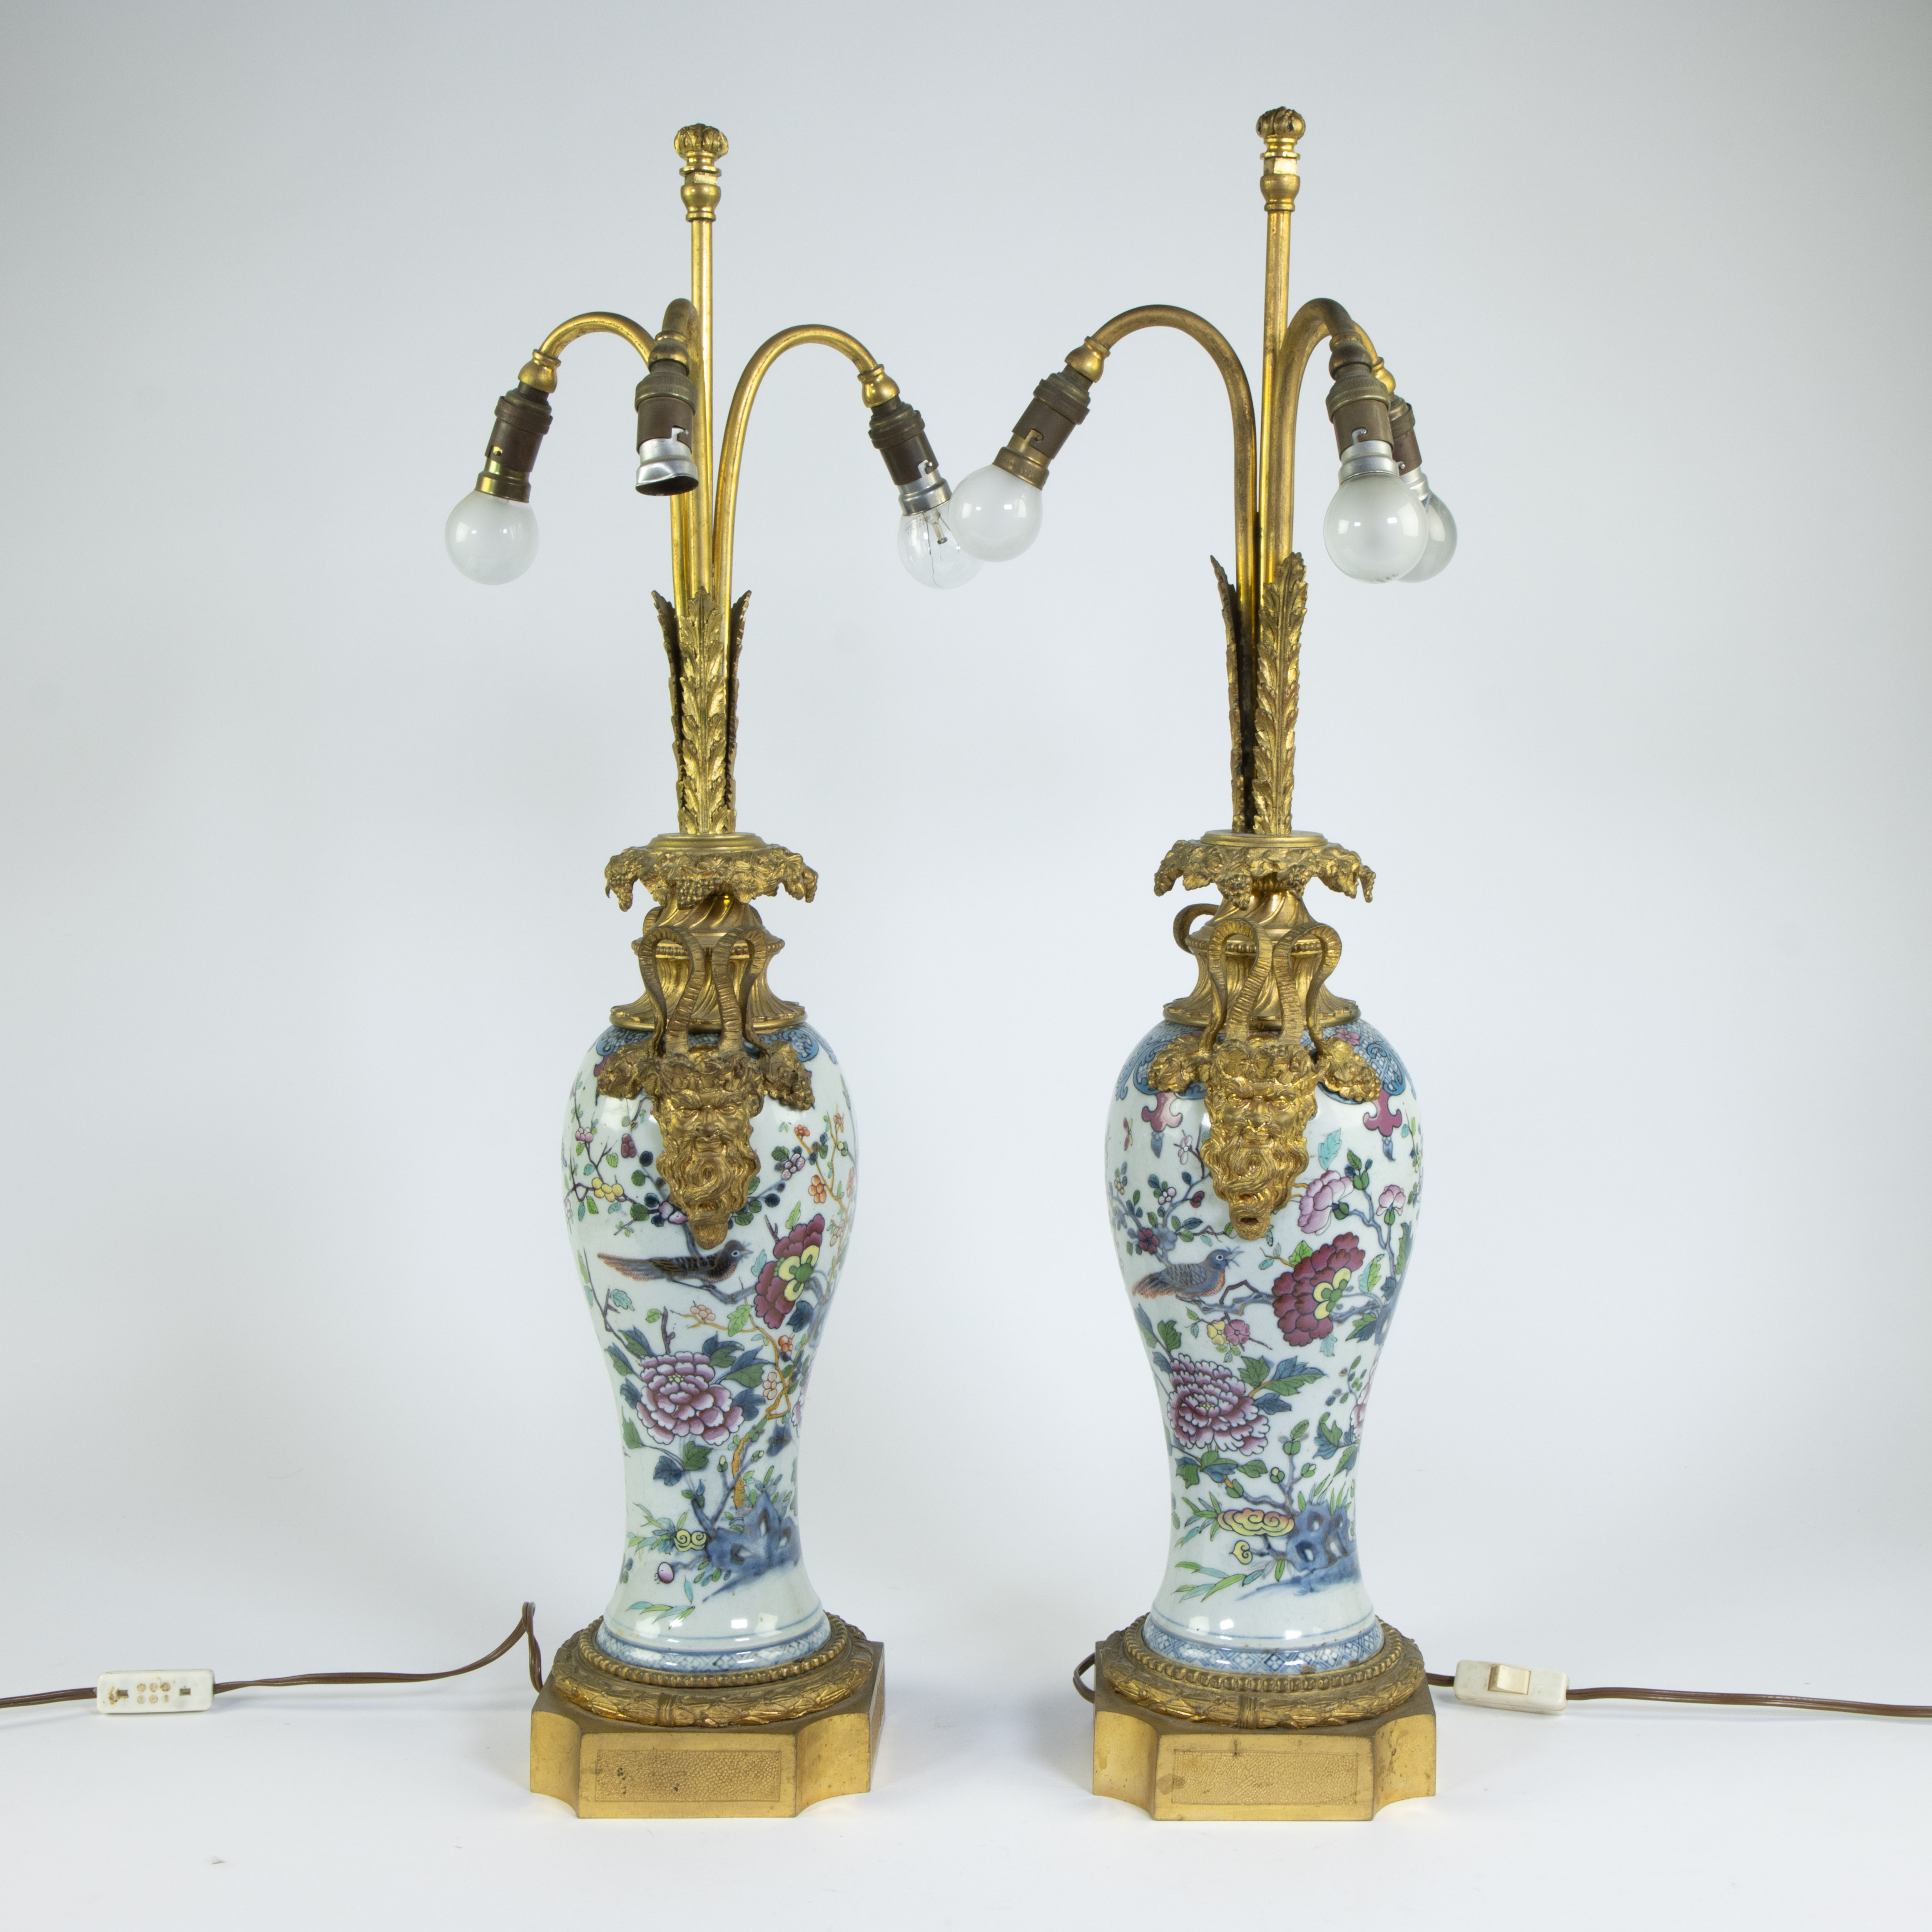 Pair of Chinese famille rose vases transformed into lampadaires with gilt bronze mounts, 19th centur - Image 4 of 4